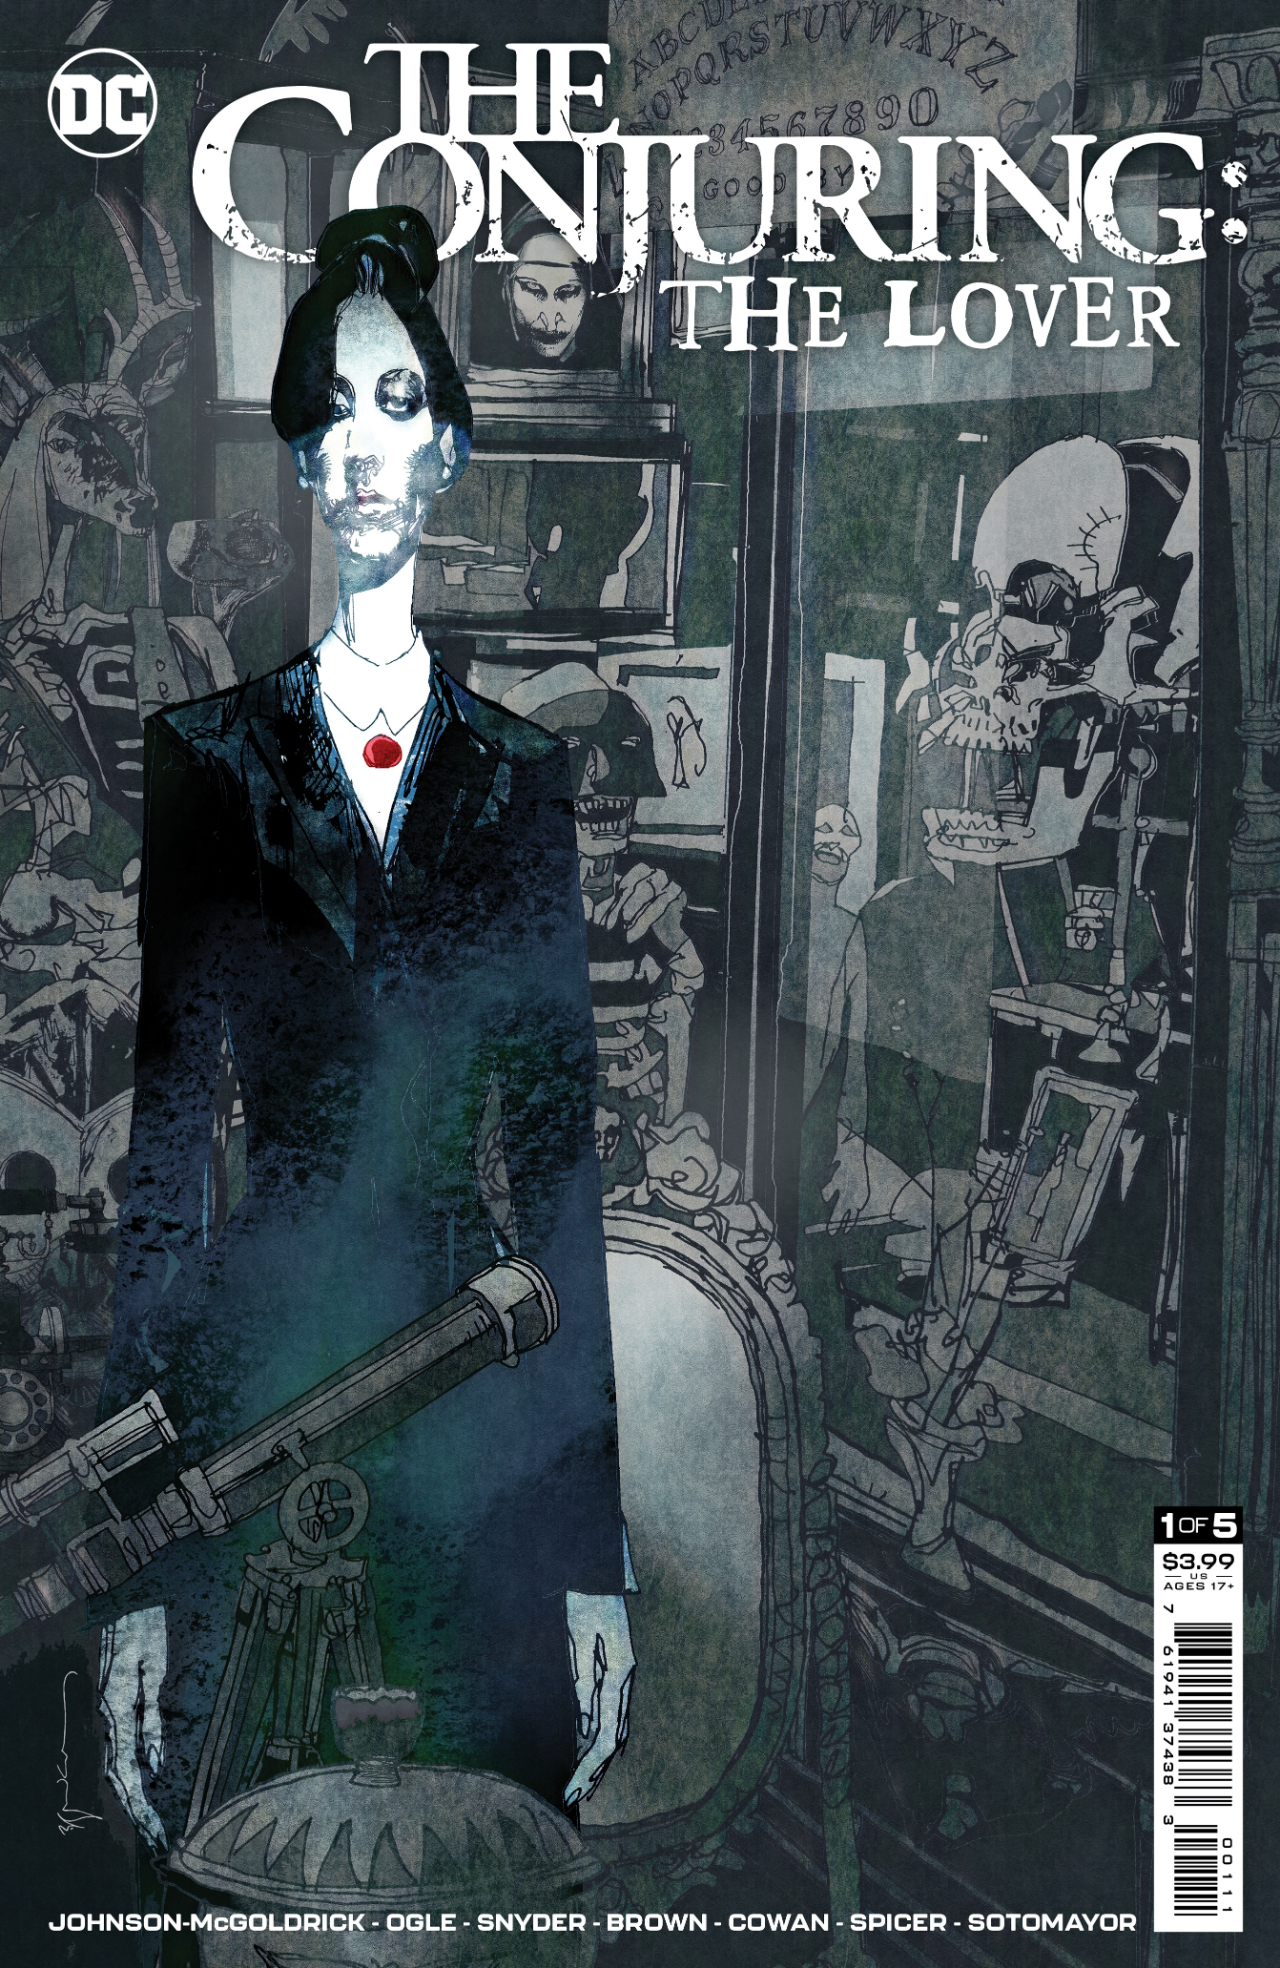 The Conjuring: The Lover #1